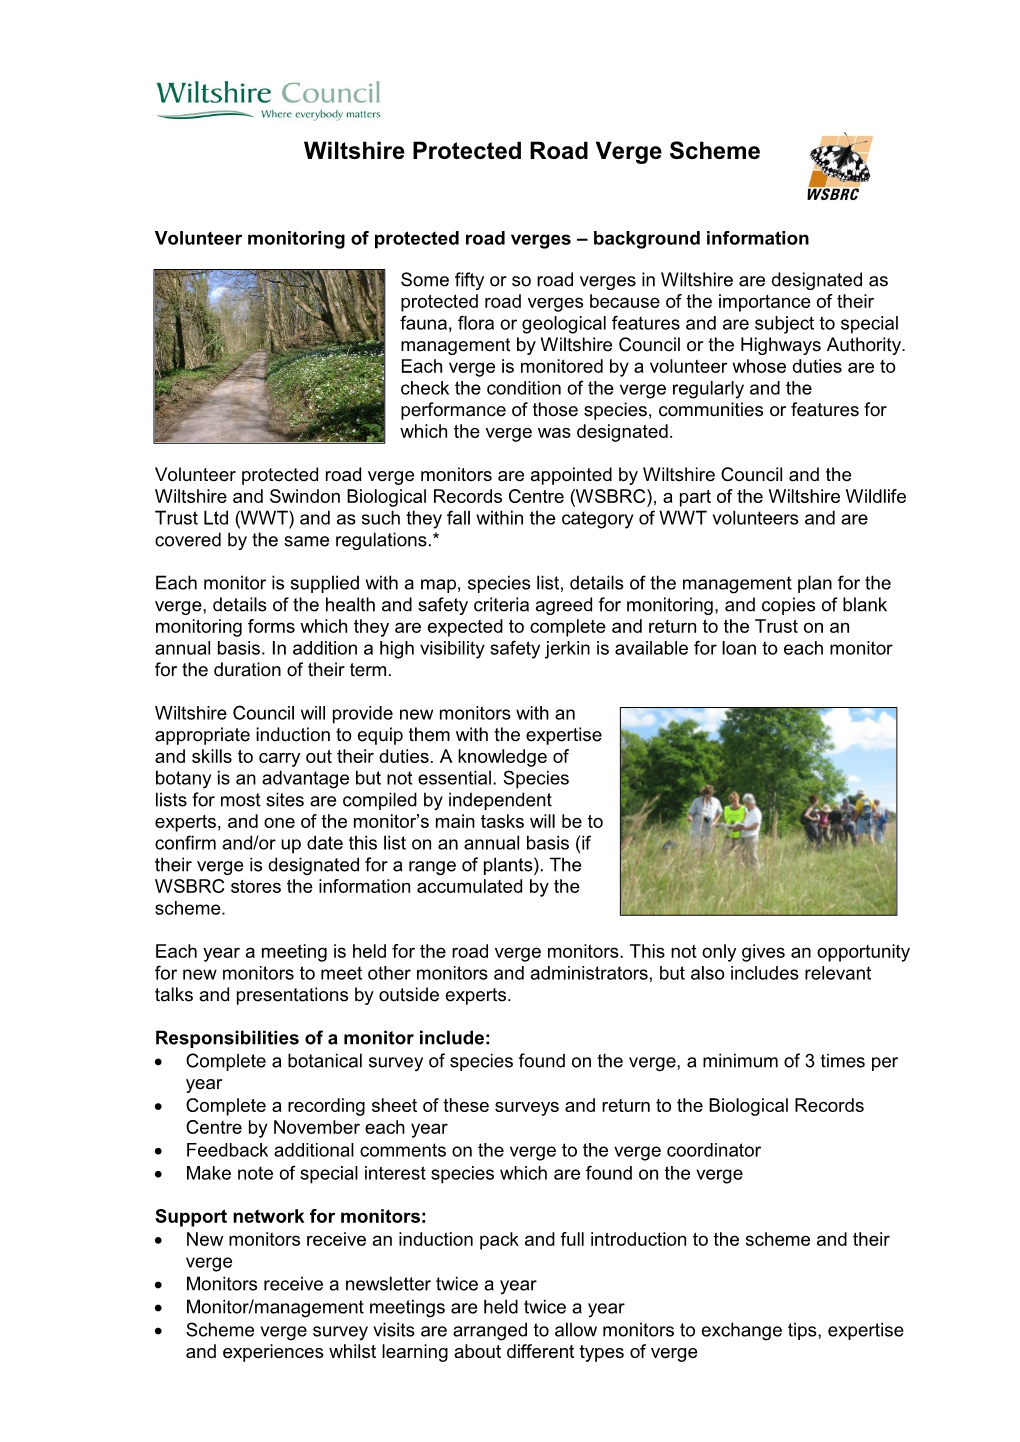 Protected Road Verge Information Sheet